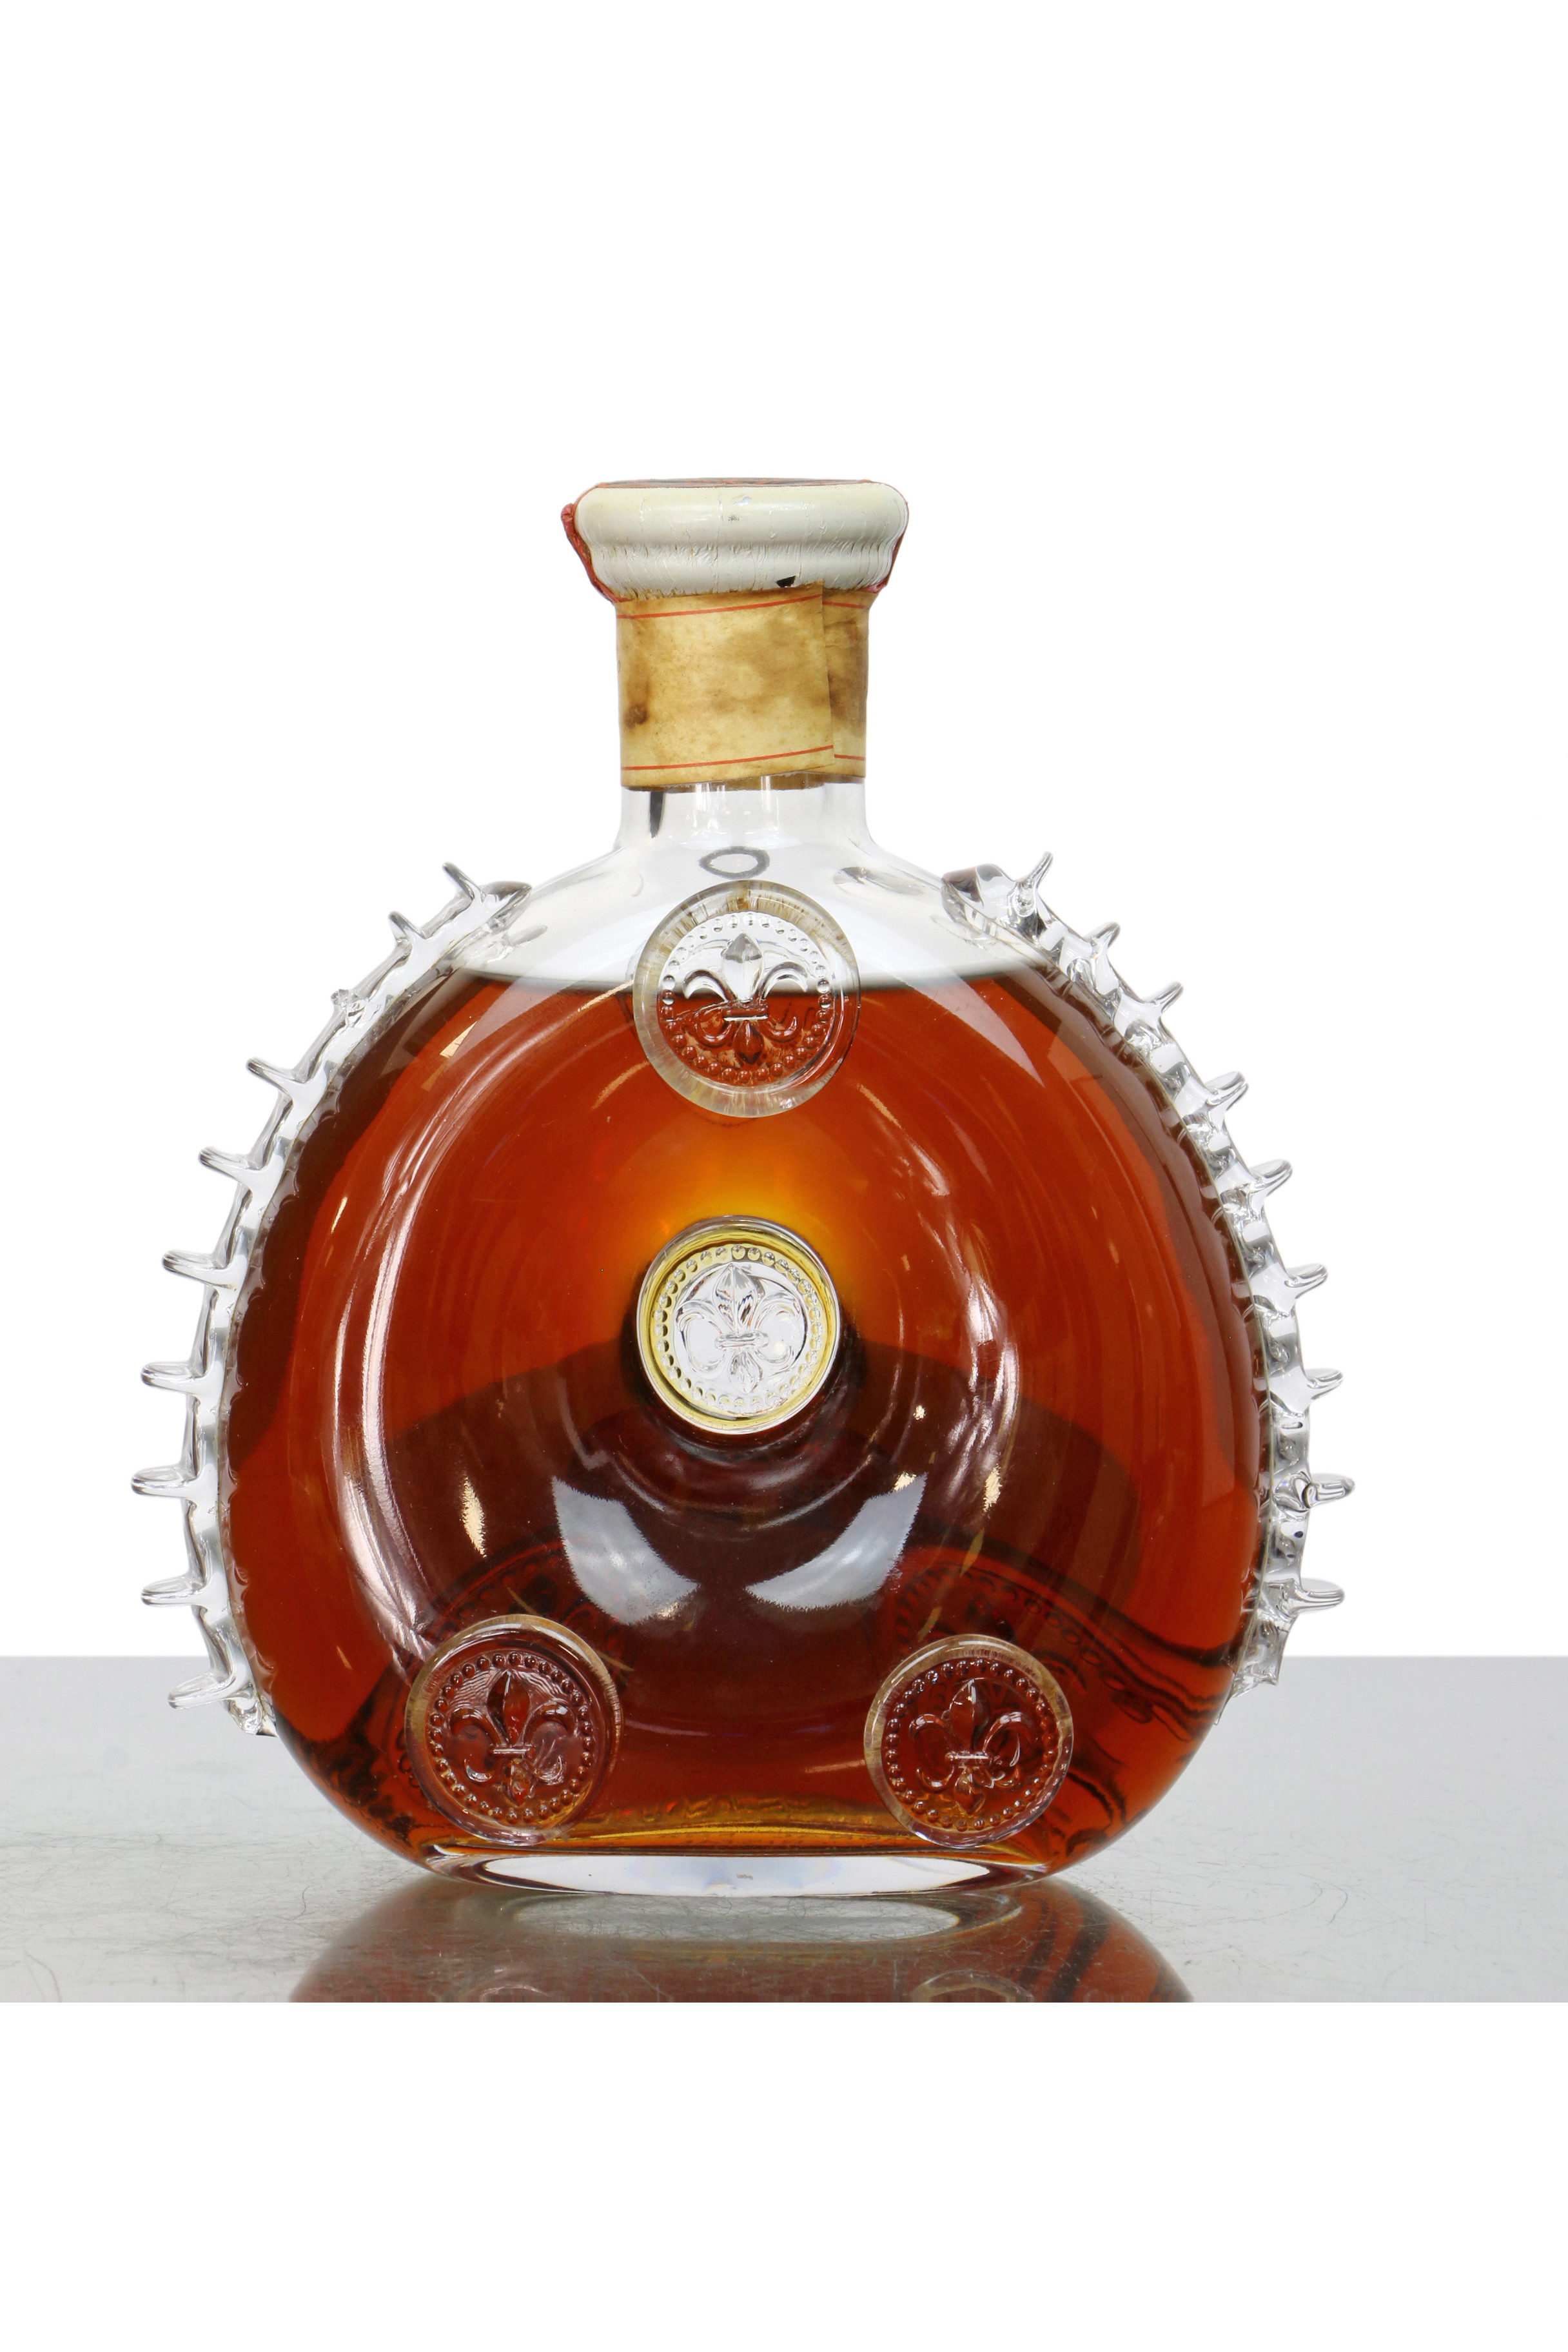 Sold at Auction: Baccarat Remy Martin Louis XIII Cognac Decanter w/Box